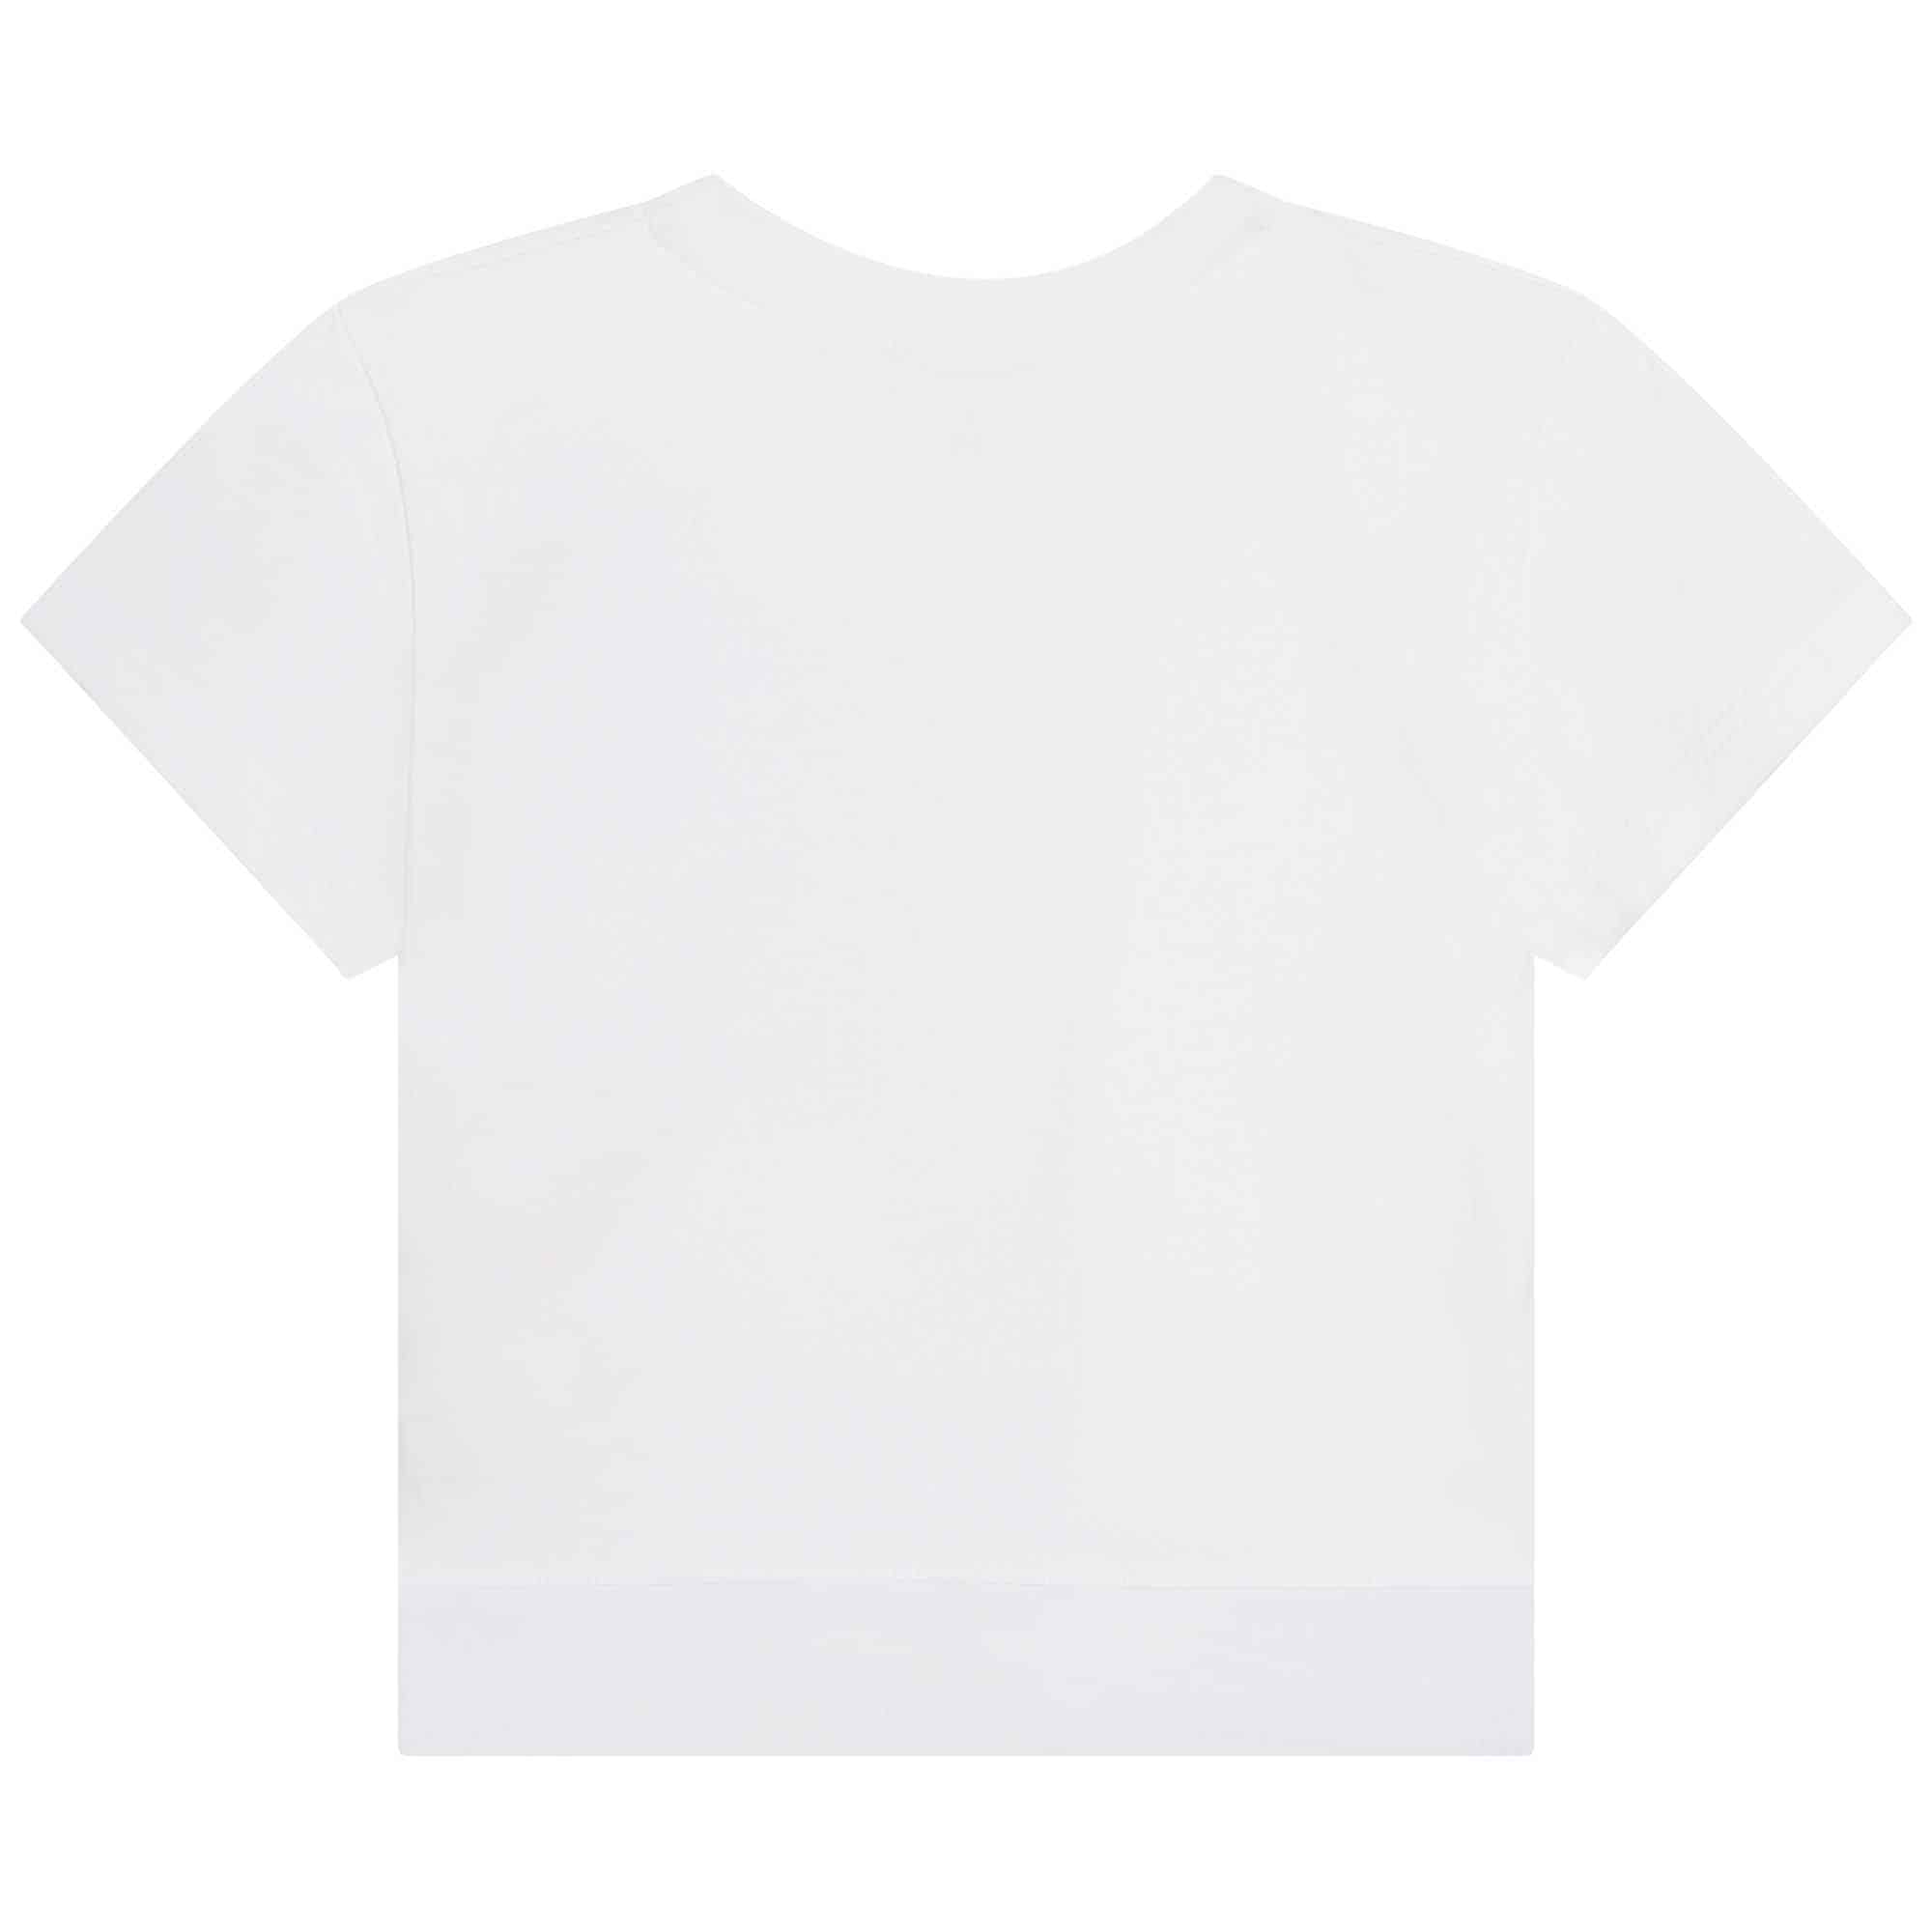 DKNY girls tshirt with multiple logos back view